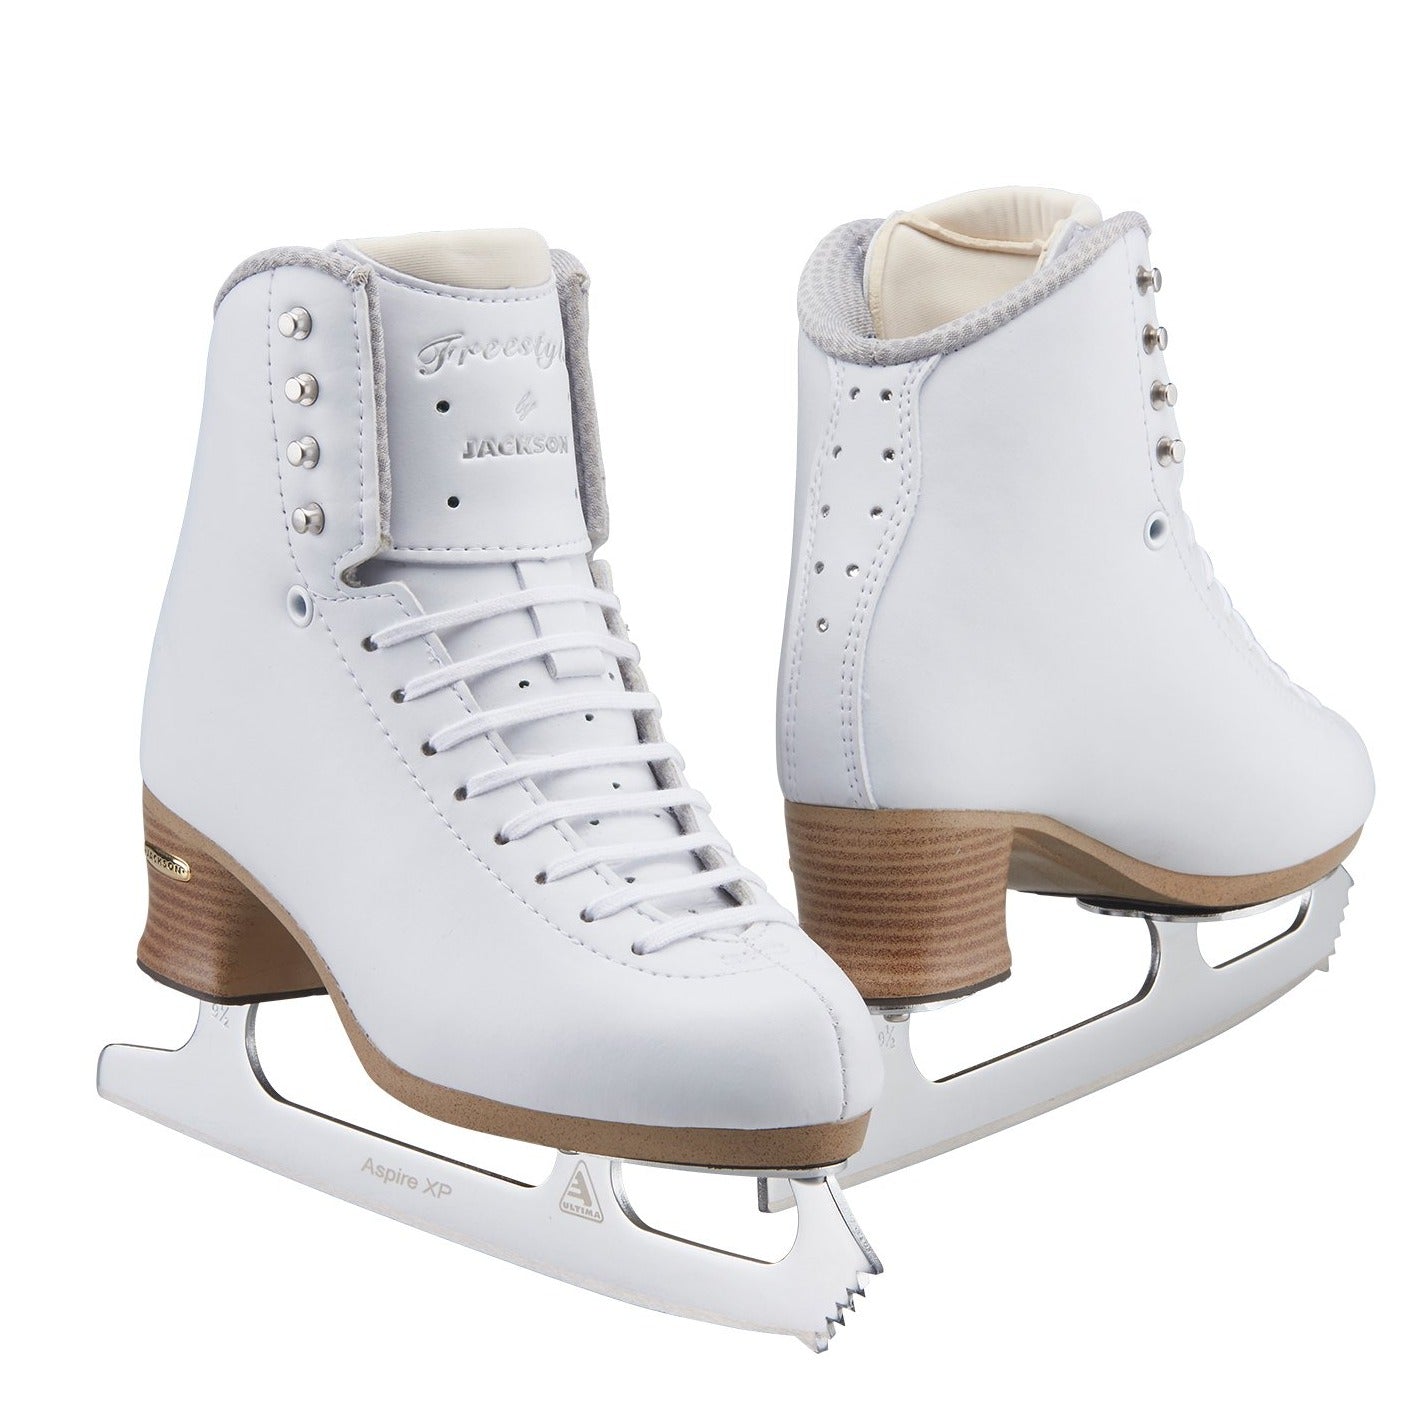 Figure skating store with jackson figure skates when canada ice